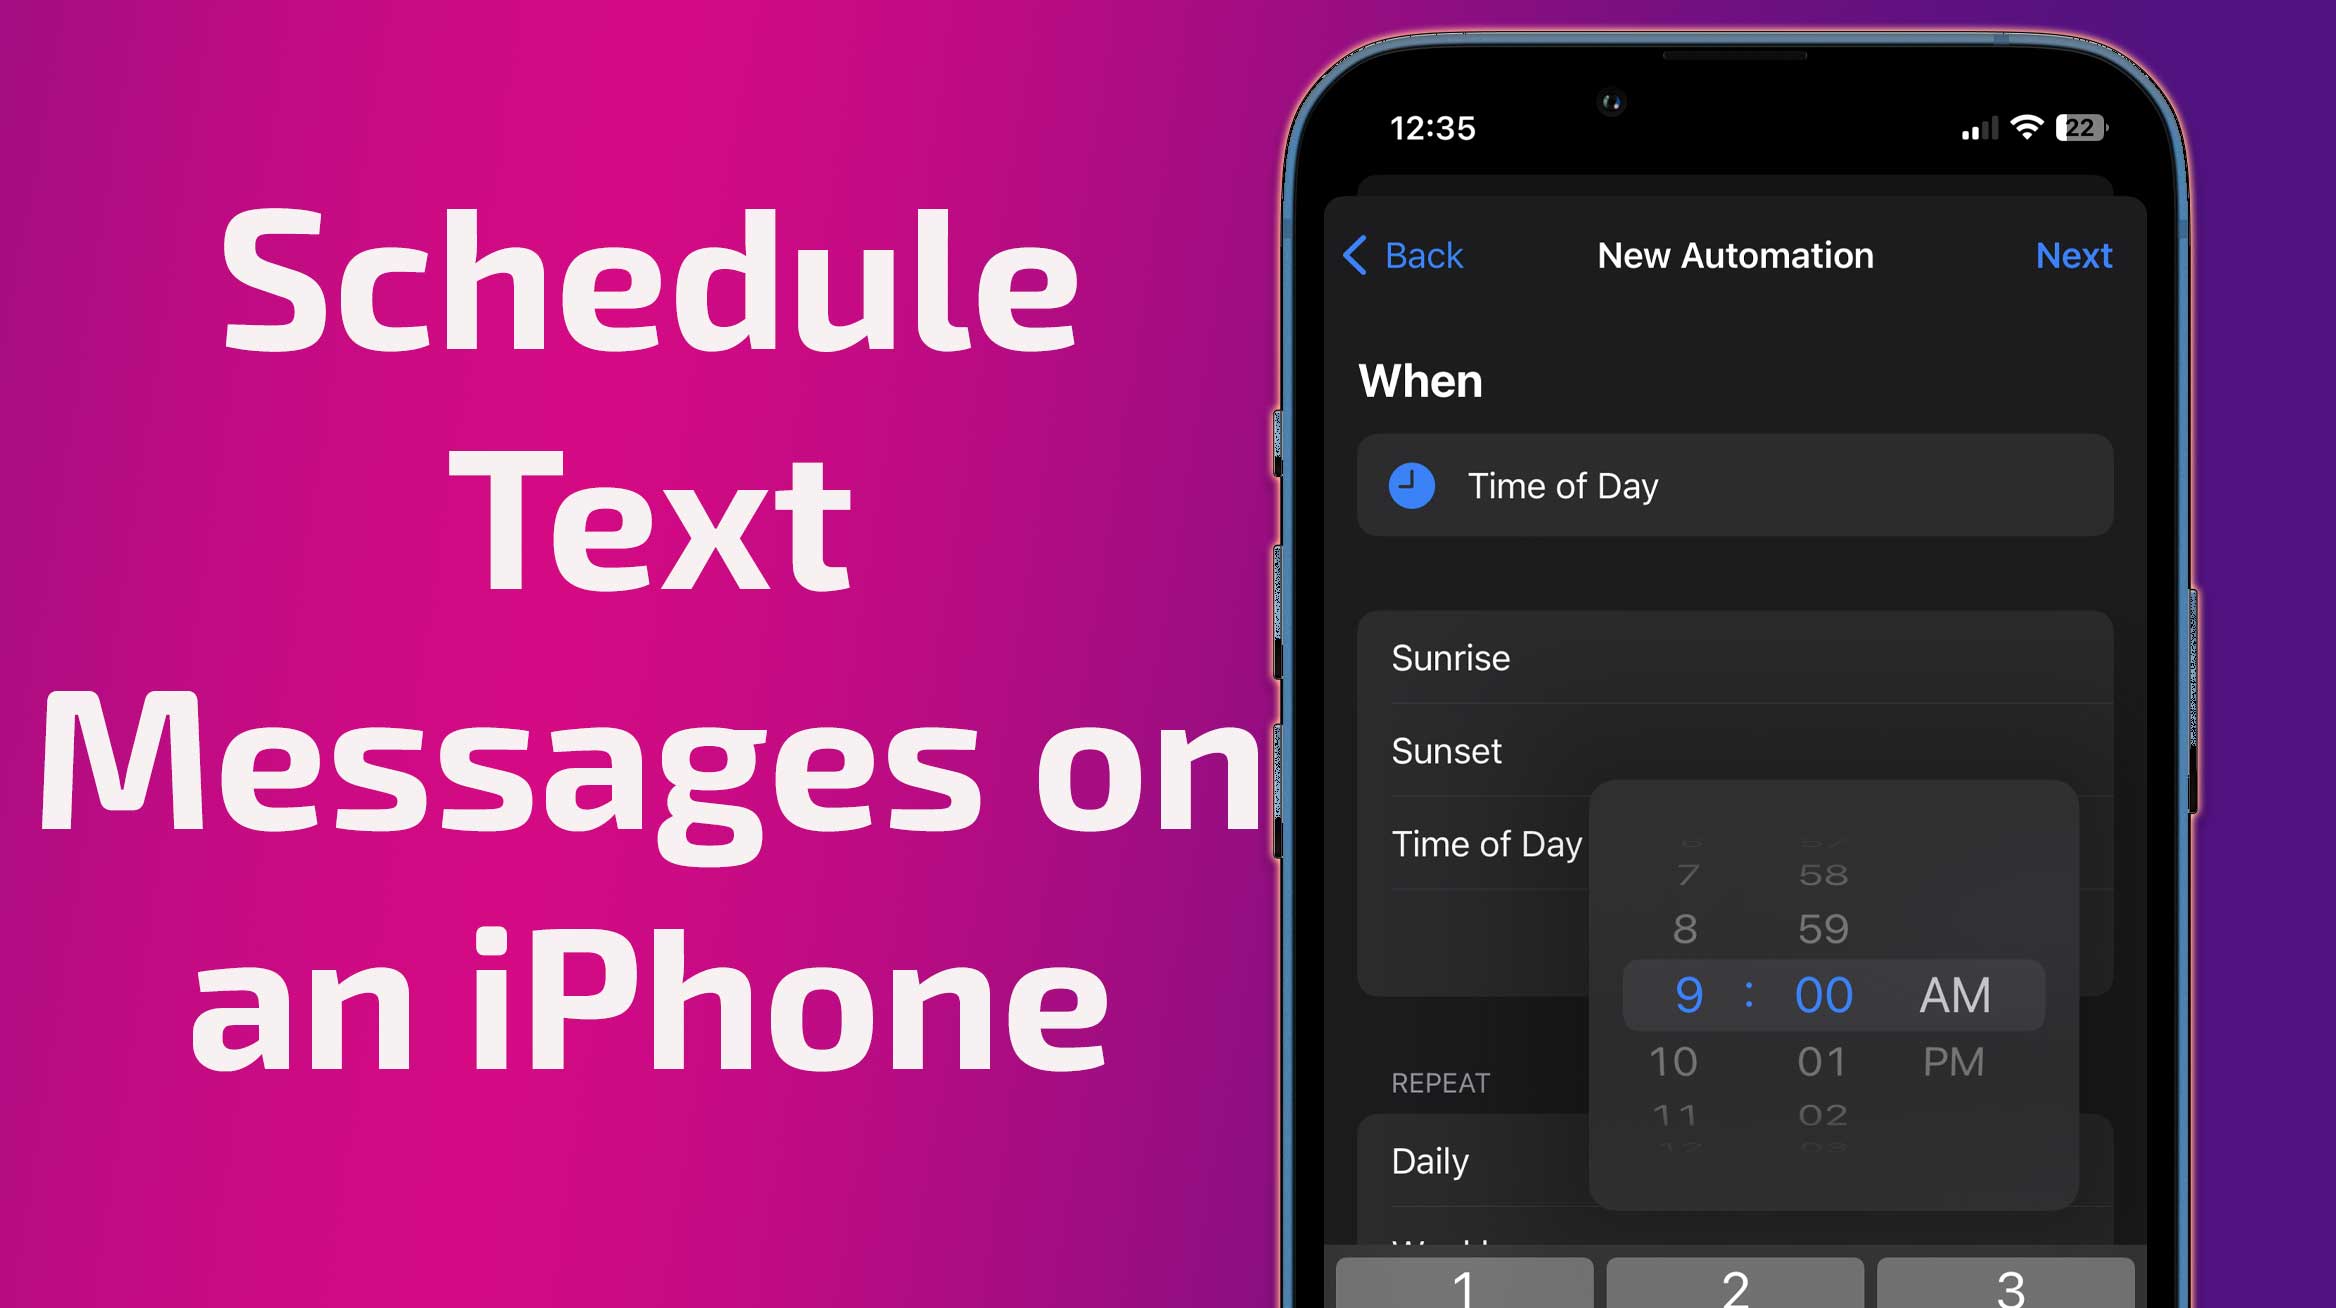 Here’s how to easily schedule Text Messages on Your iPhone